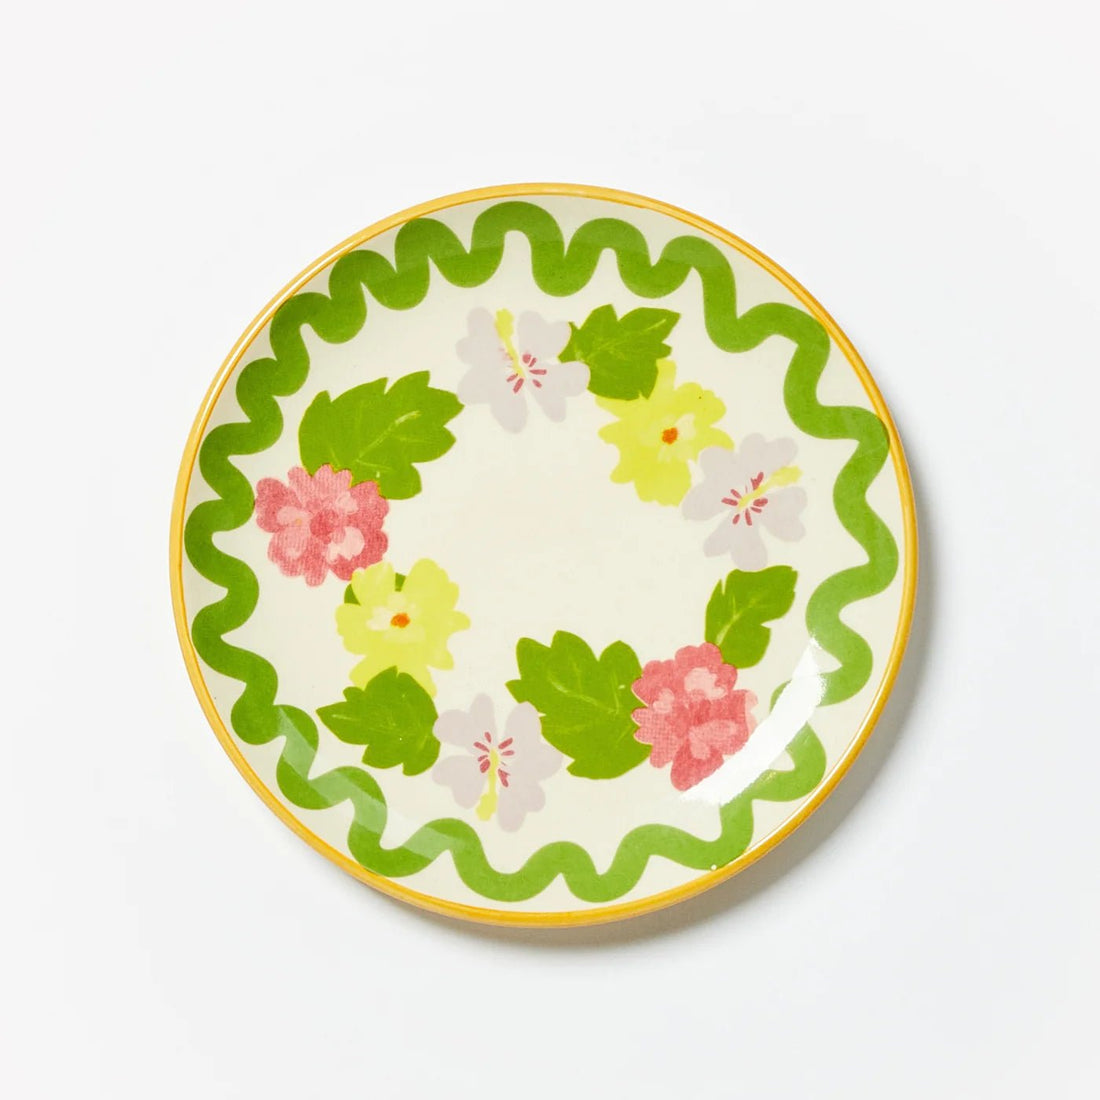 Bonnie &amp; Neil - Moana Dinner Plate - The Flower Crate